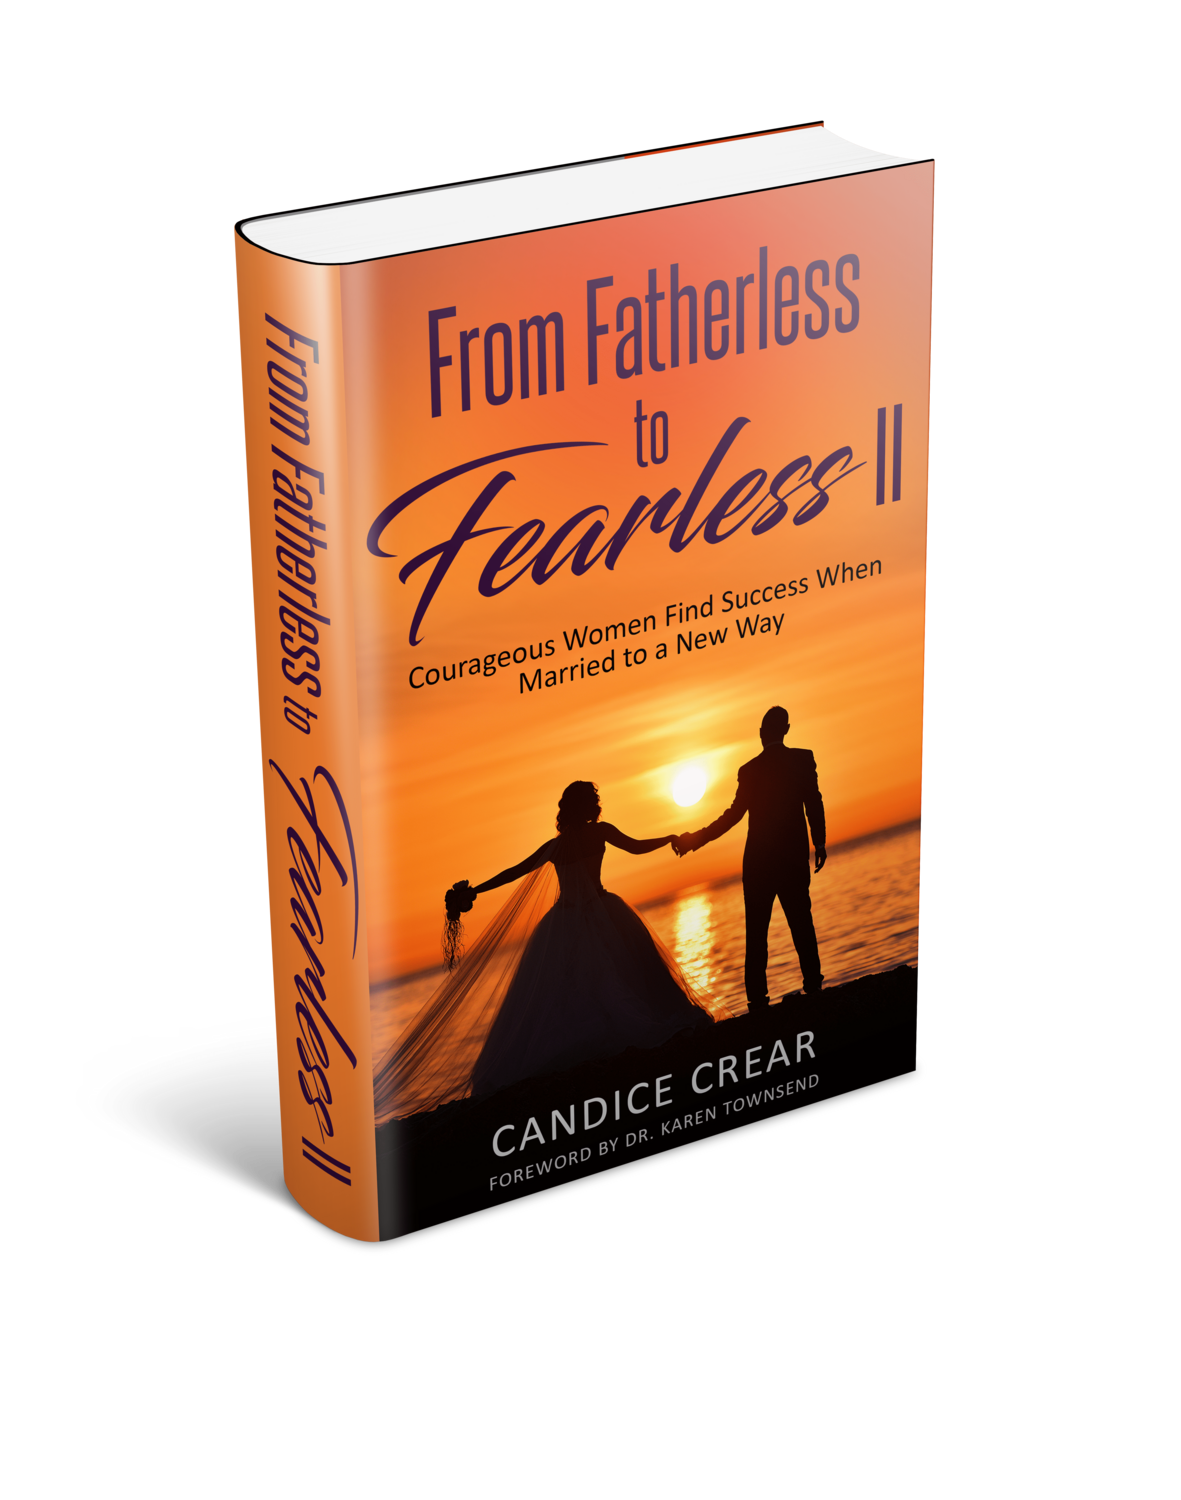 From Fatherless to Fearless II: Courageous Women Find Success When Married to a New Way